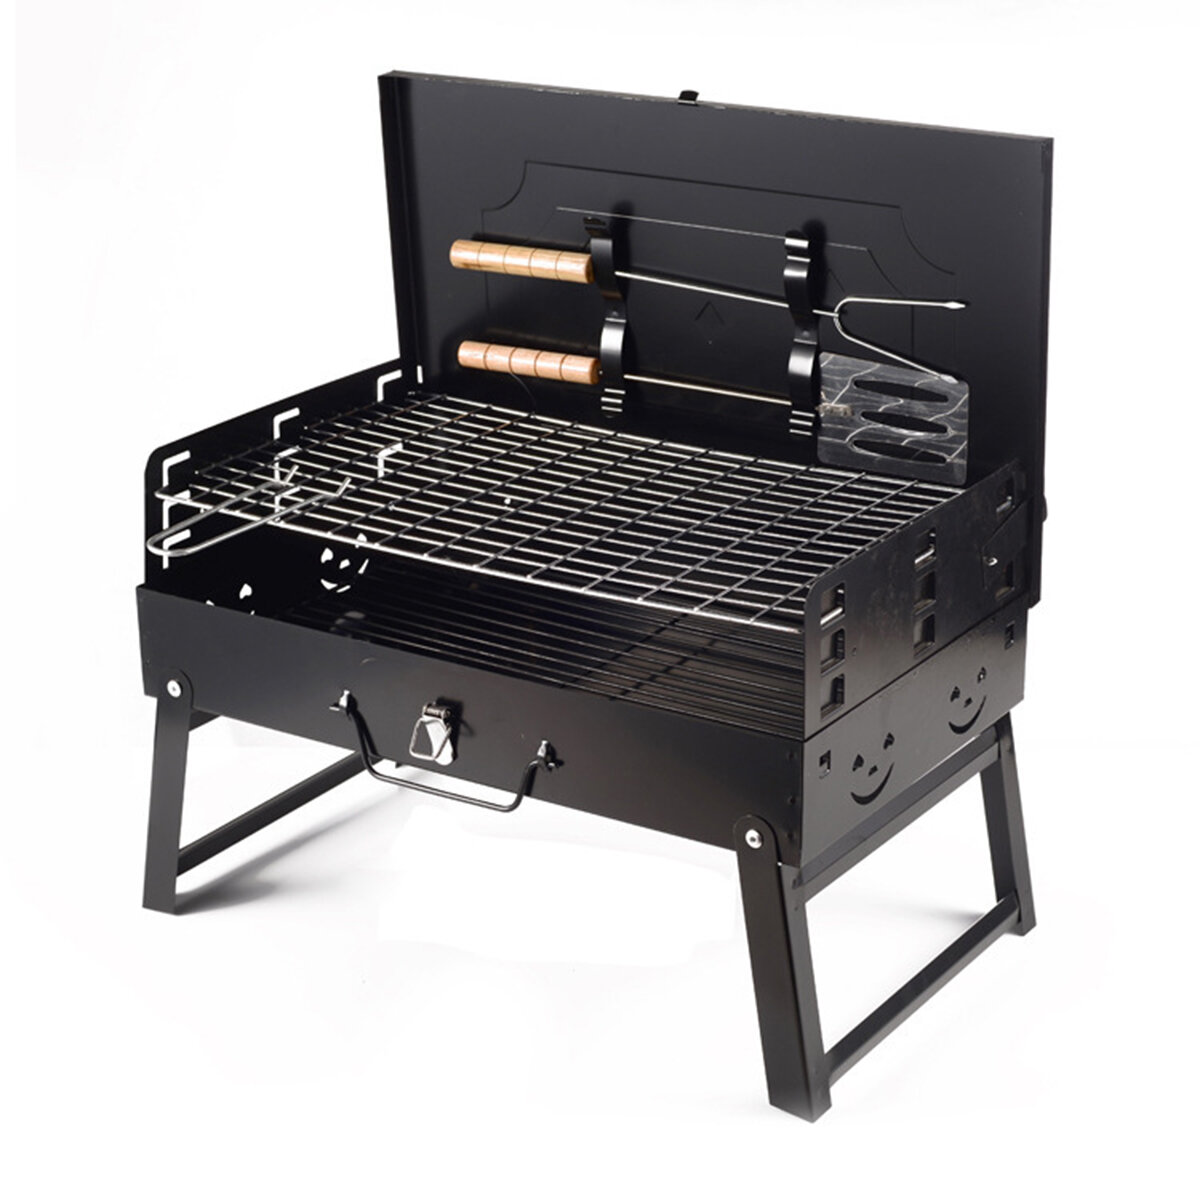 Folding BBQ Grill Portable Charcoal Steel Stove Outdoor Camping Picnic Barbecue Stove